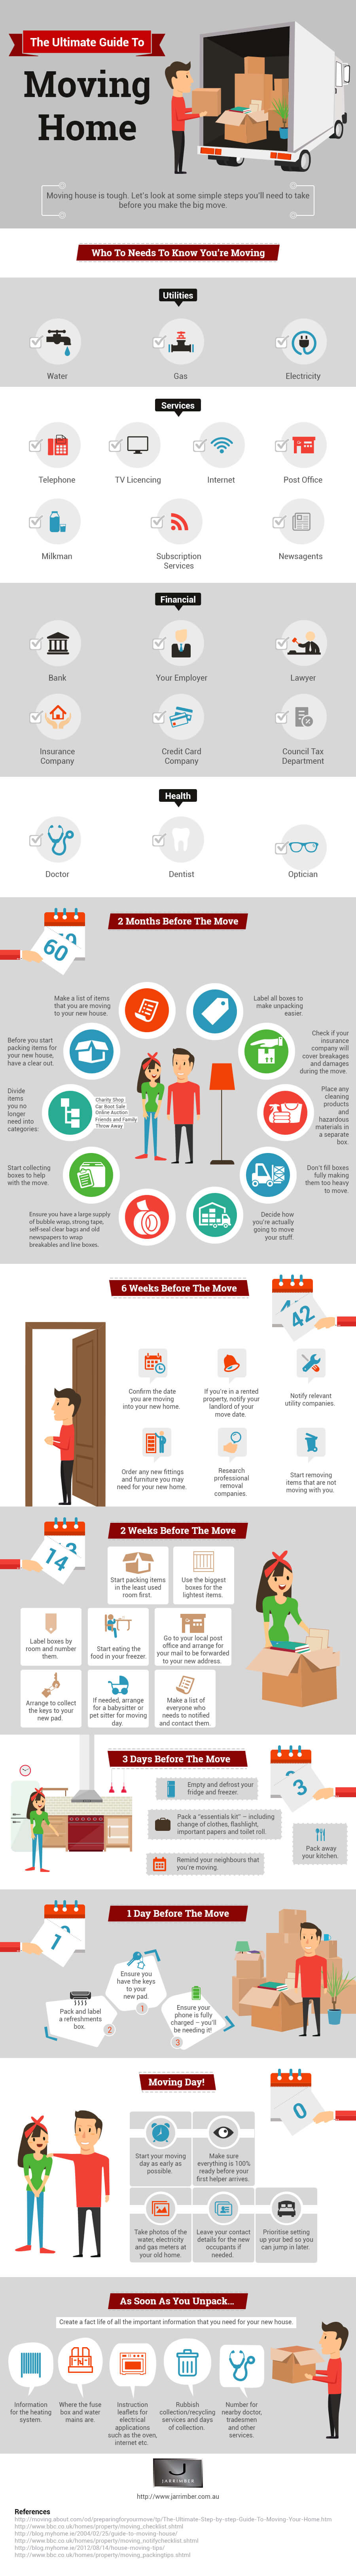 The-Ultimate-Guide-To-Moving-Home-infographic-plaza